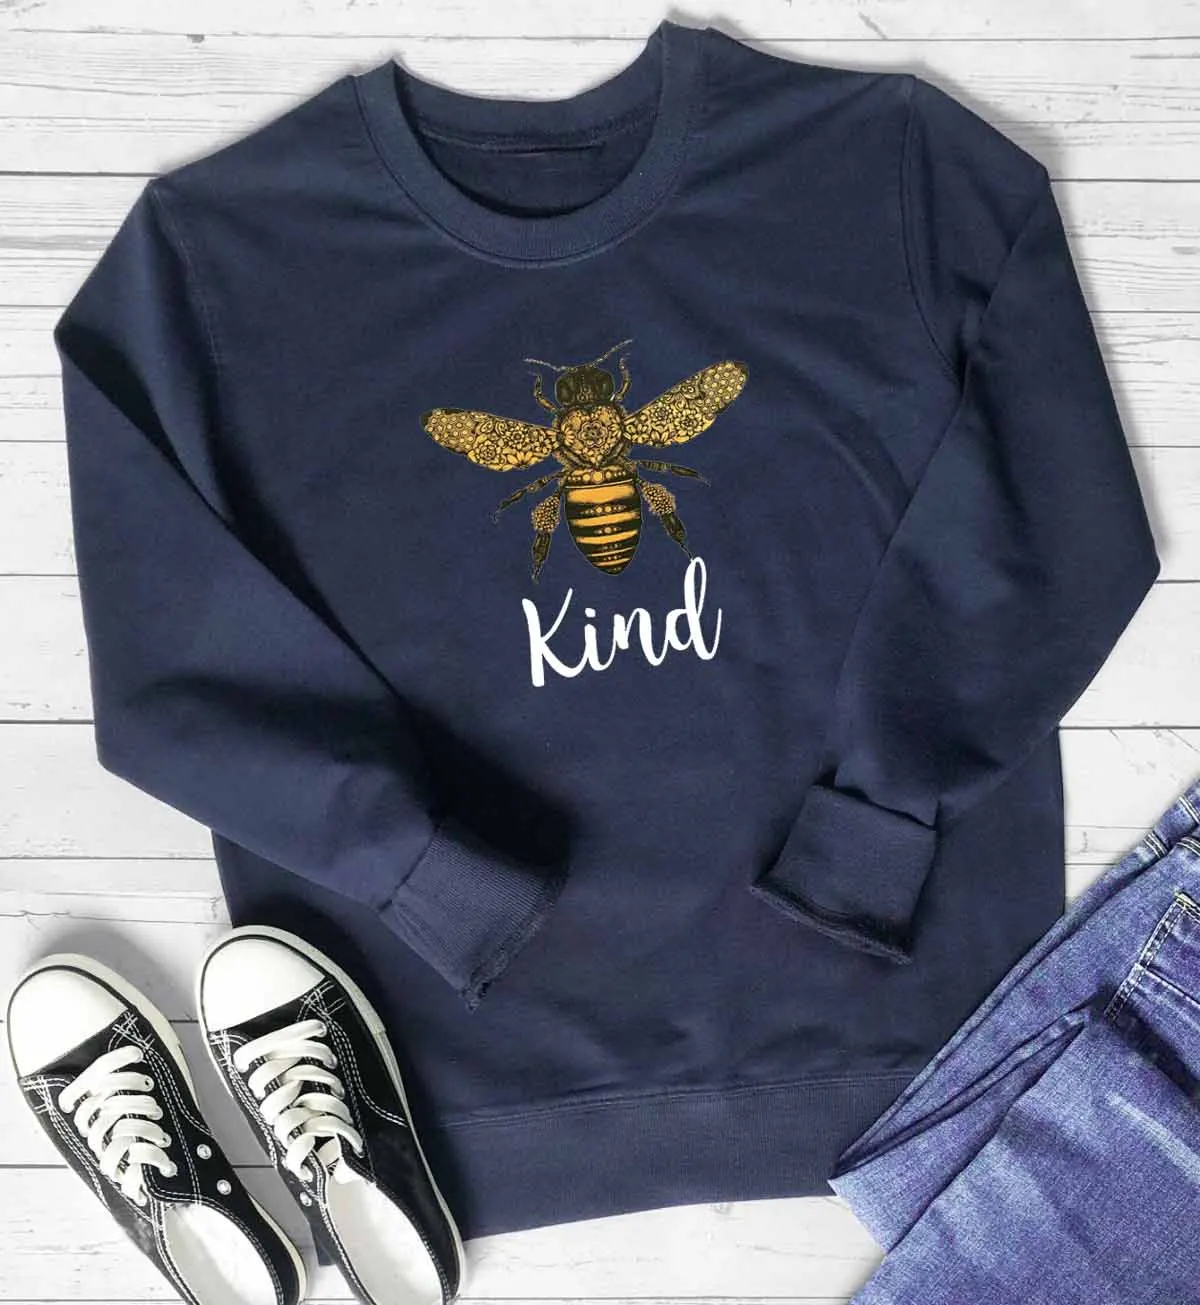 

Bee kind sweatshirt funny graphic unisex religion church party youngs hipster slogan quote graphic pullovers fashion art tops